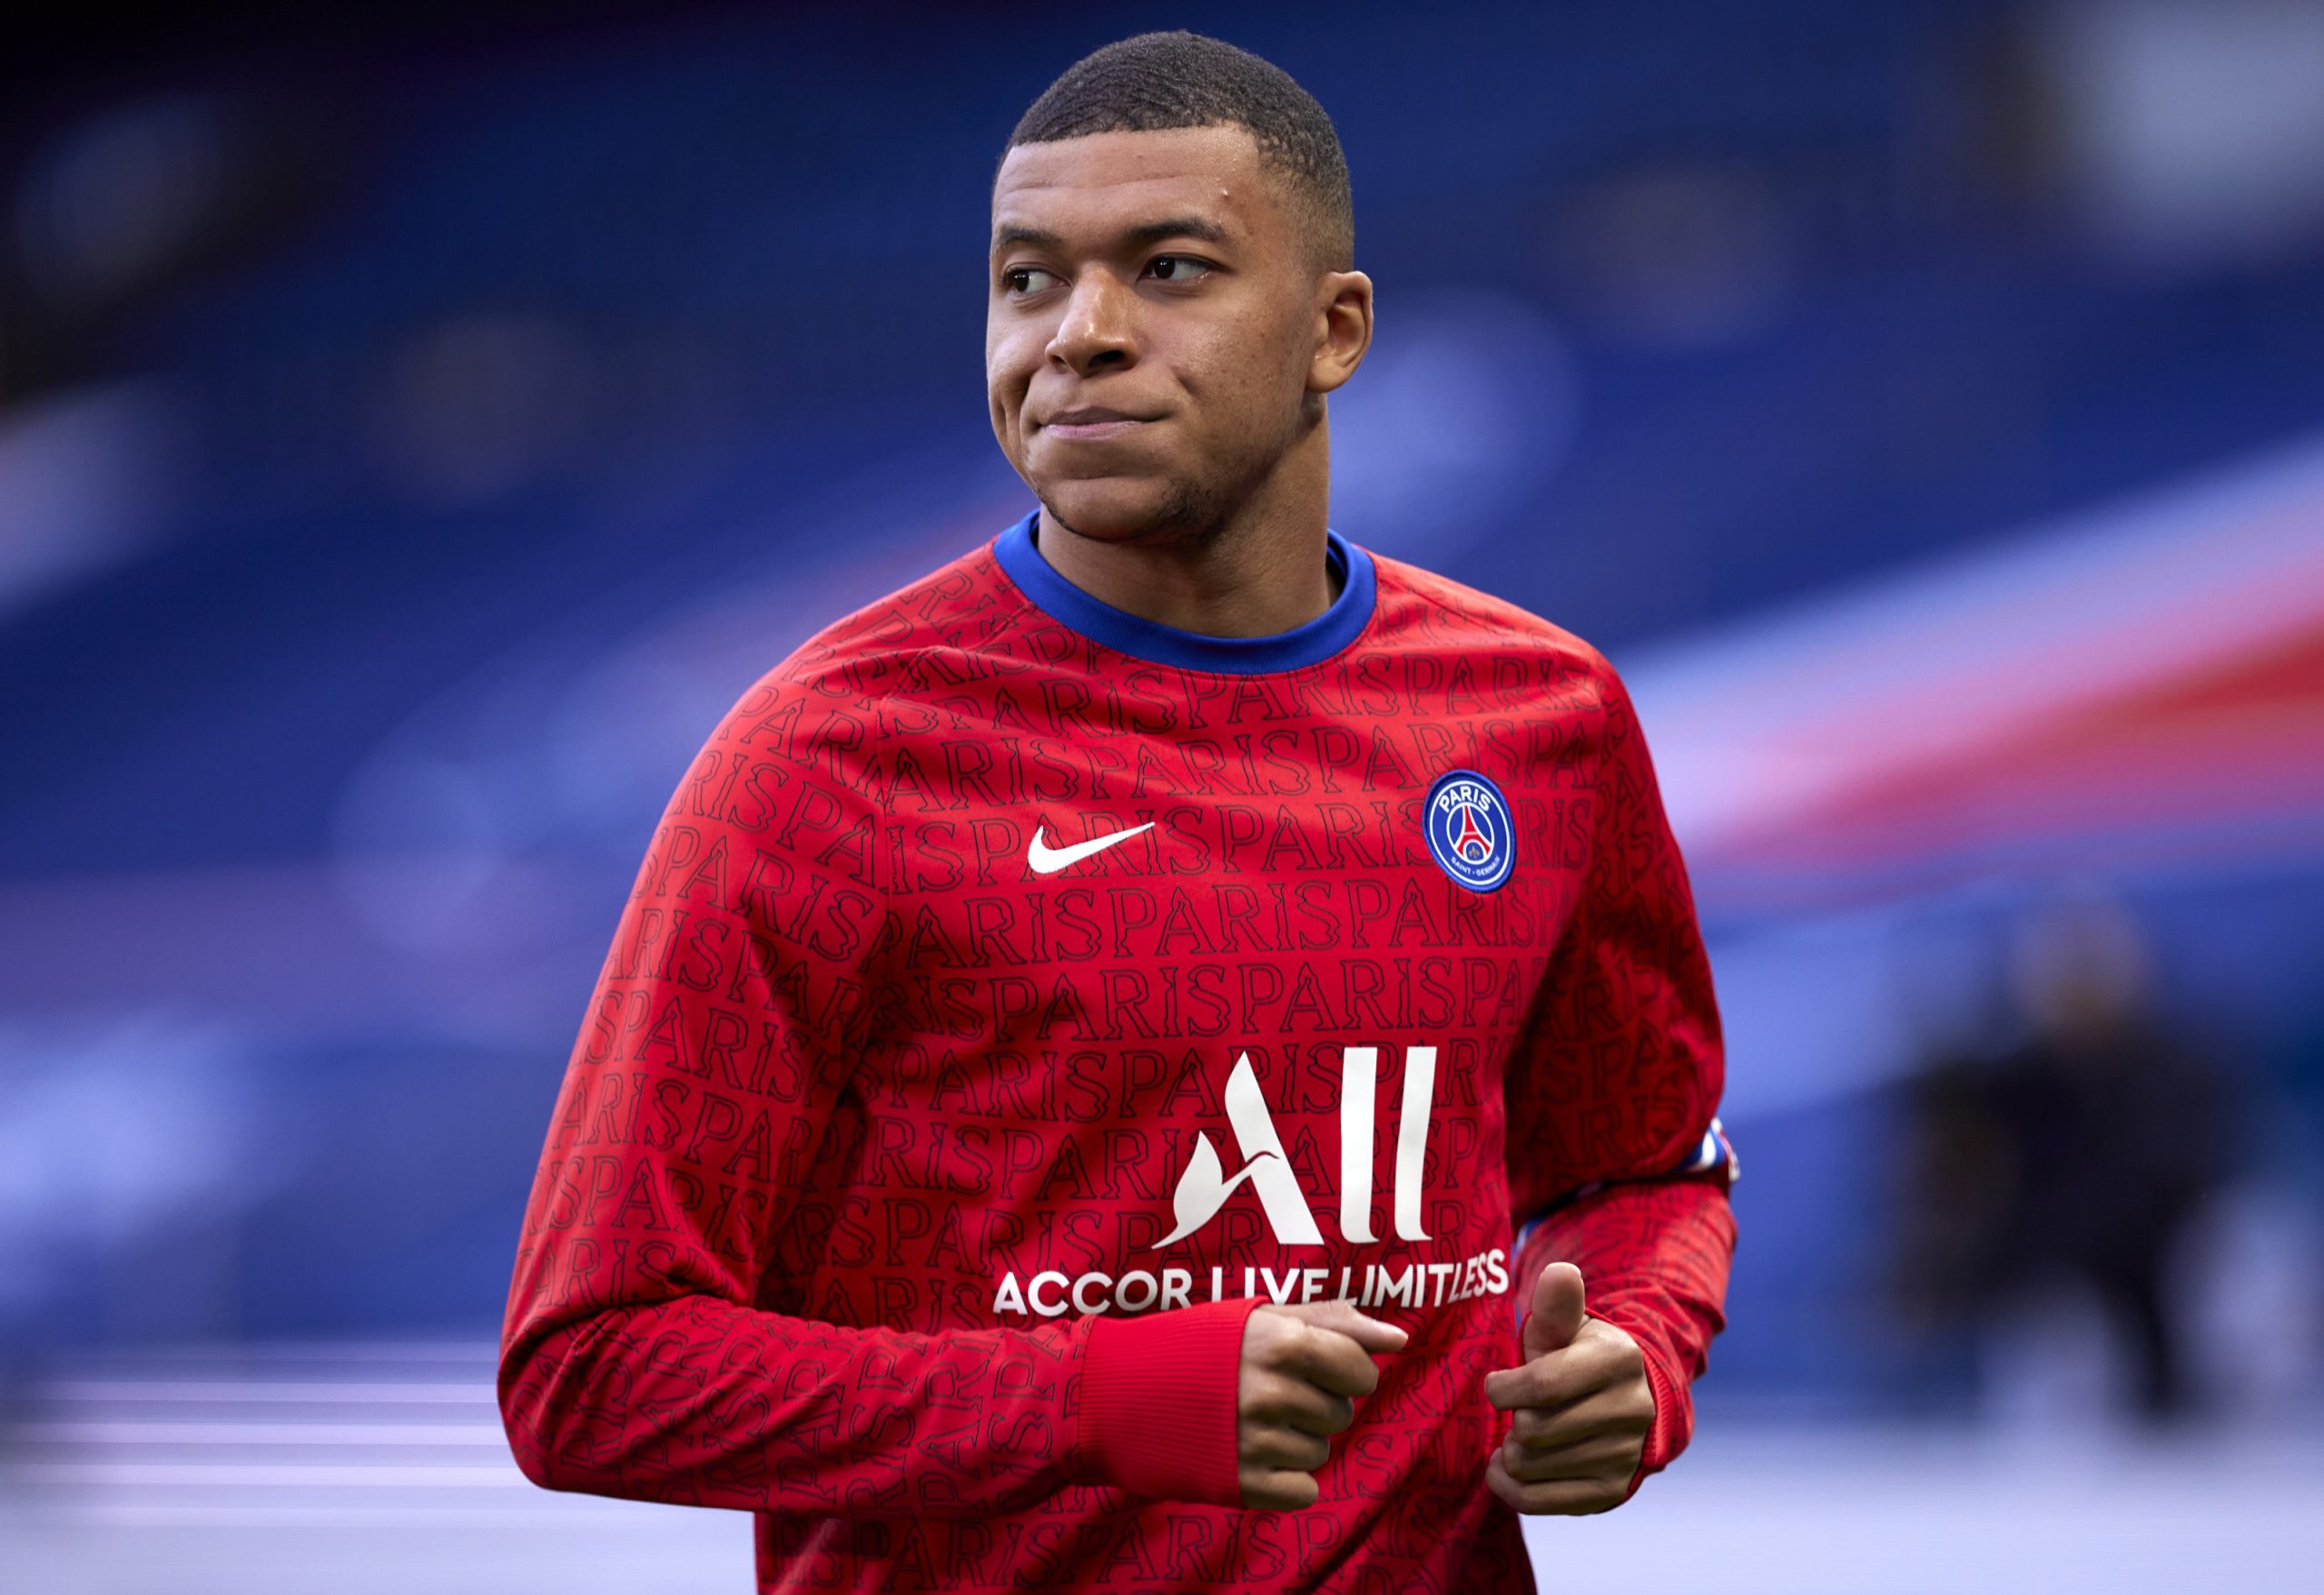 Mbappé is unhappy at PSG and wants to leave